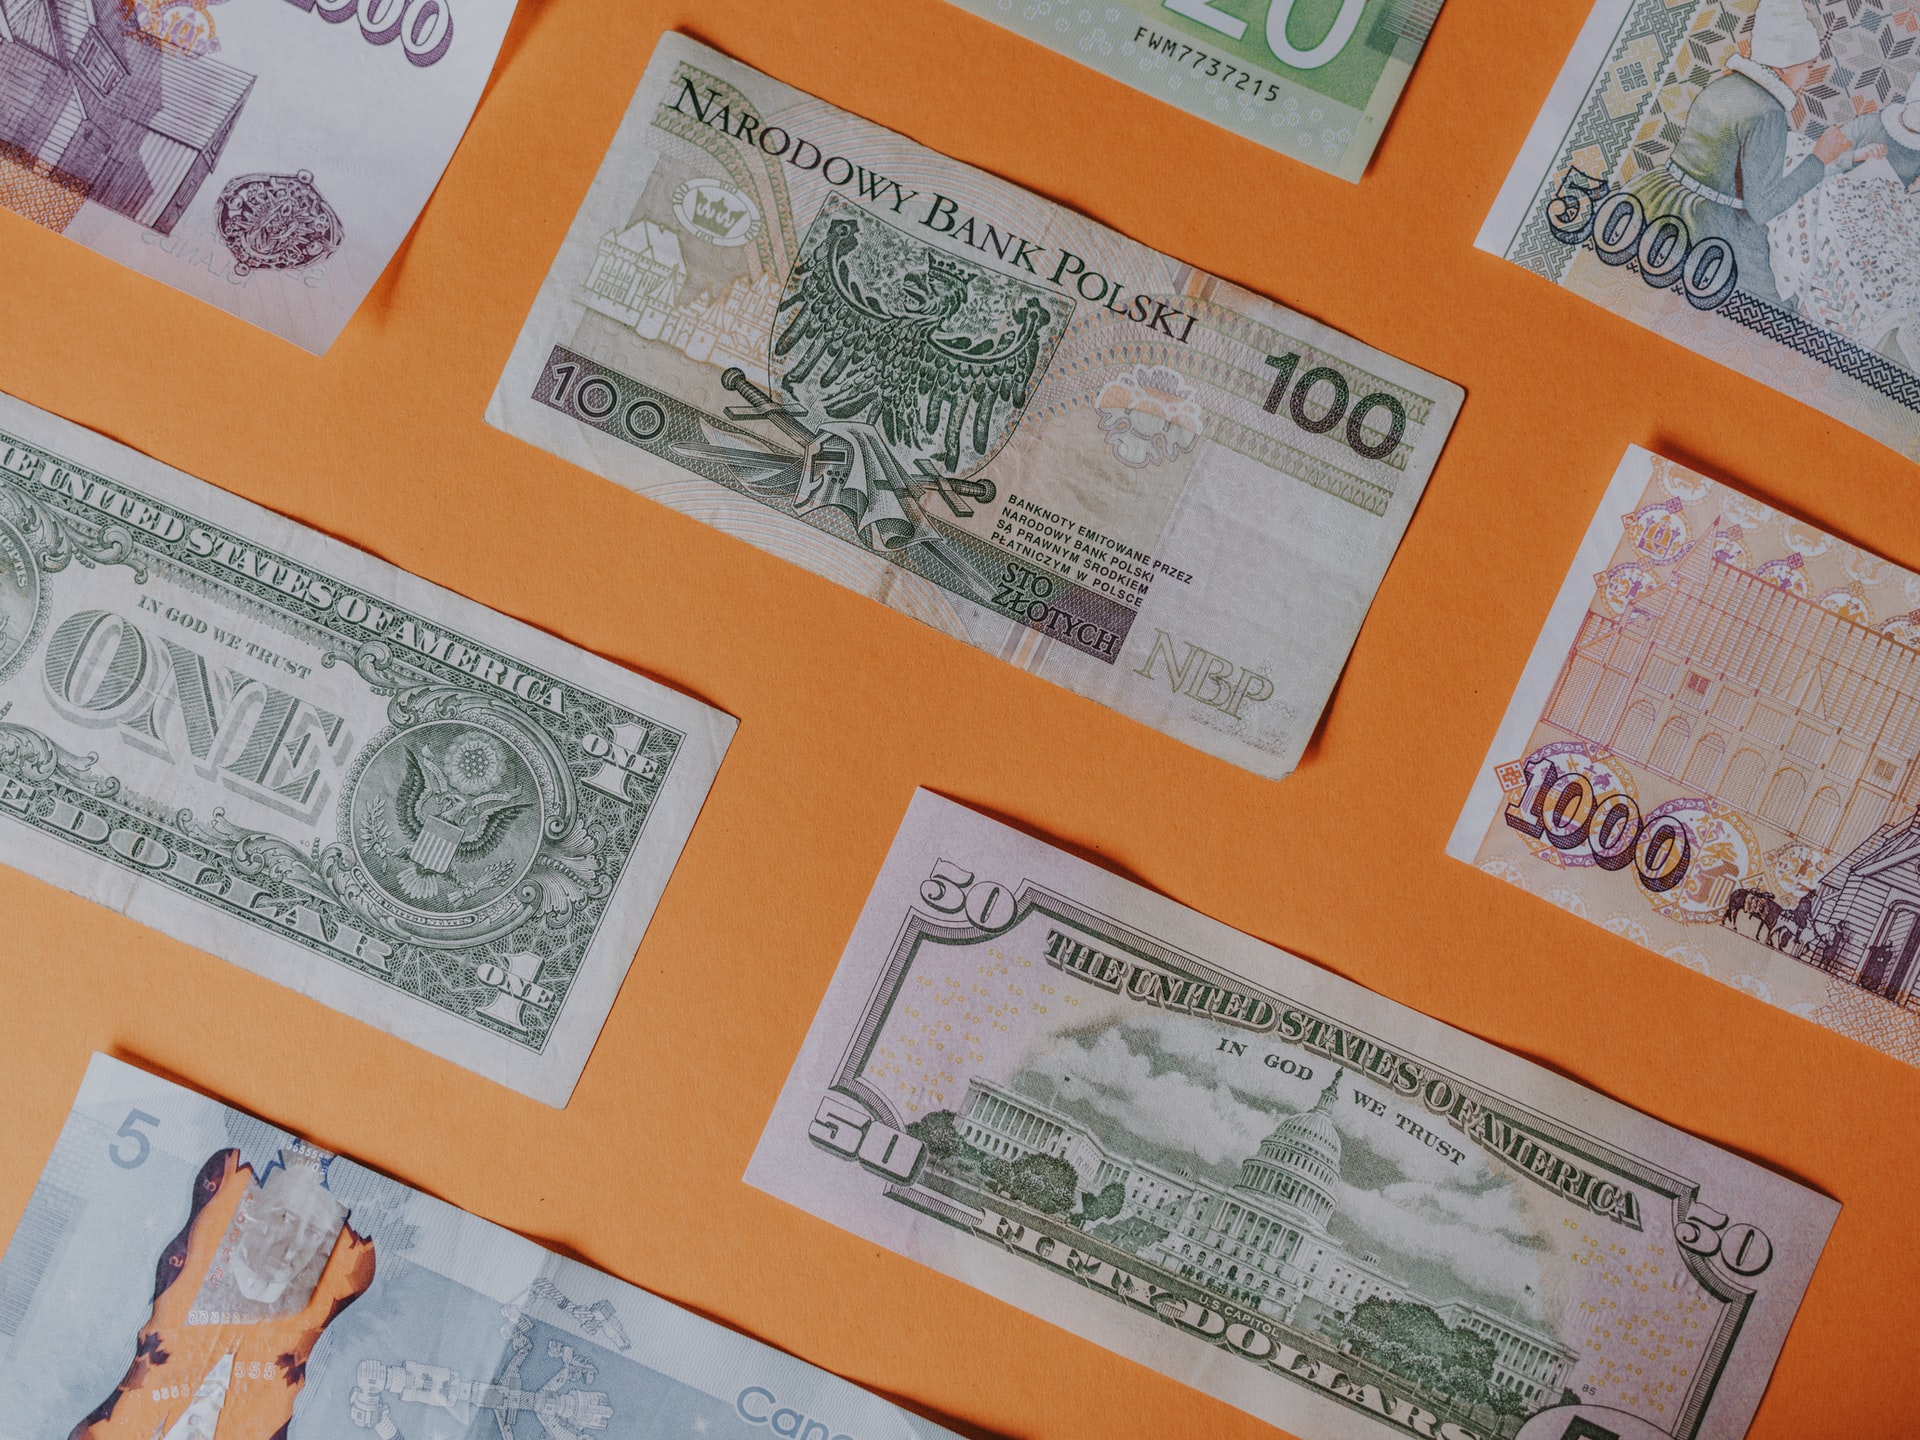 Banknotes in different international currencies representing a currency exchange scam